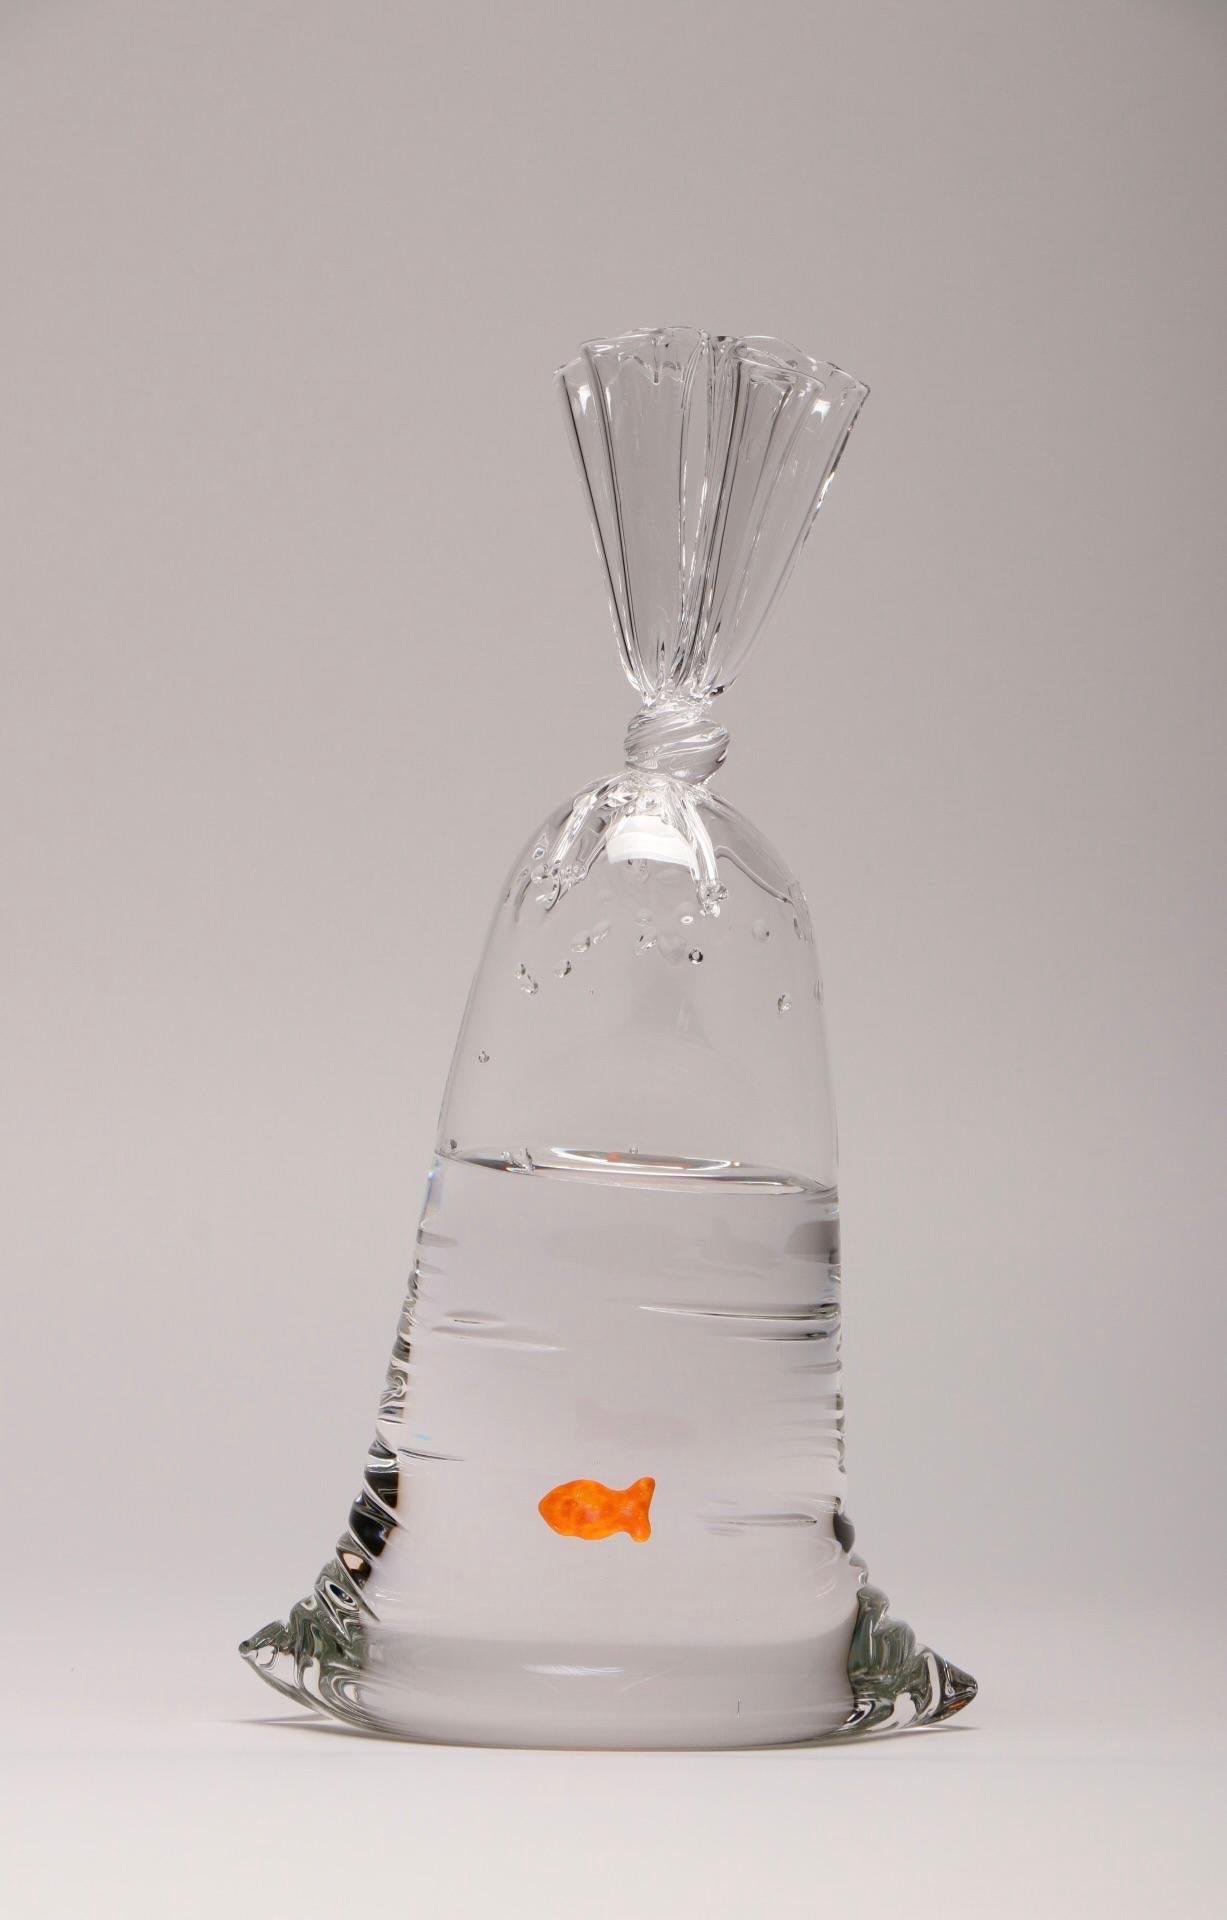 Limited Edition Small Glass Water Bag with Goldfish - Pop Art Sculpture by Dylan Martinez